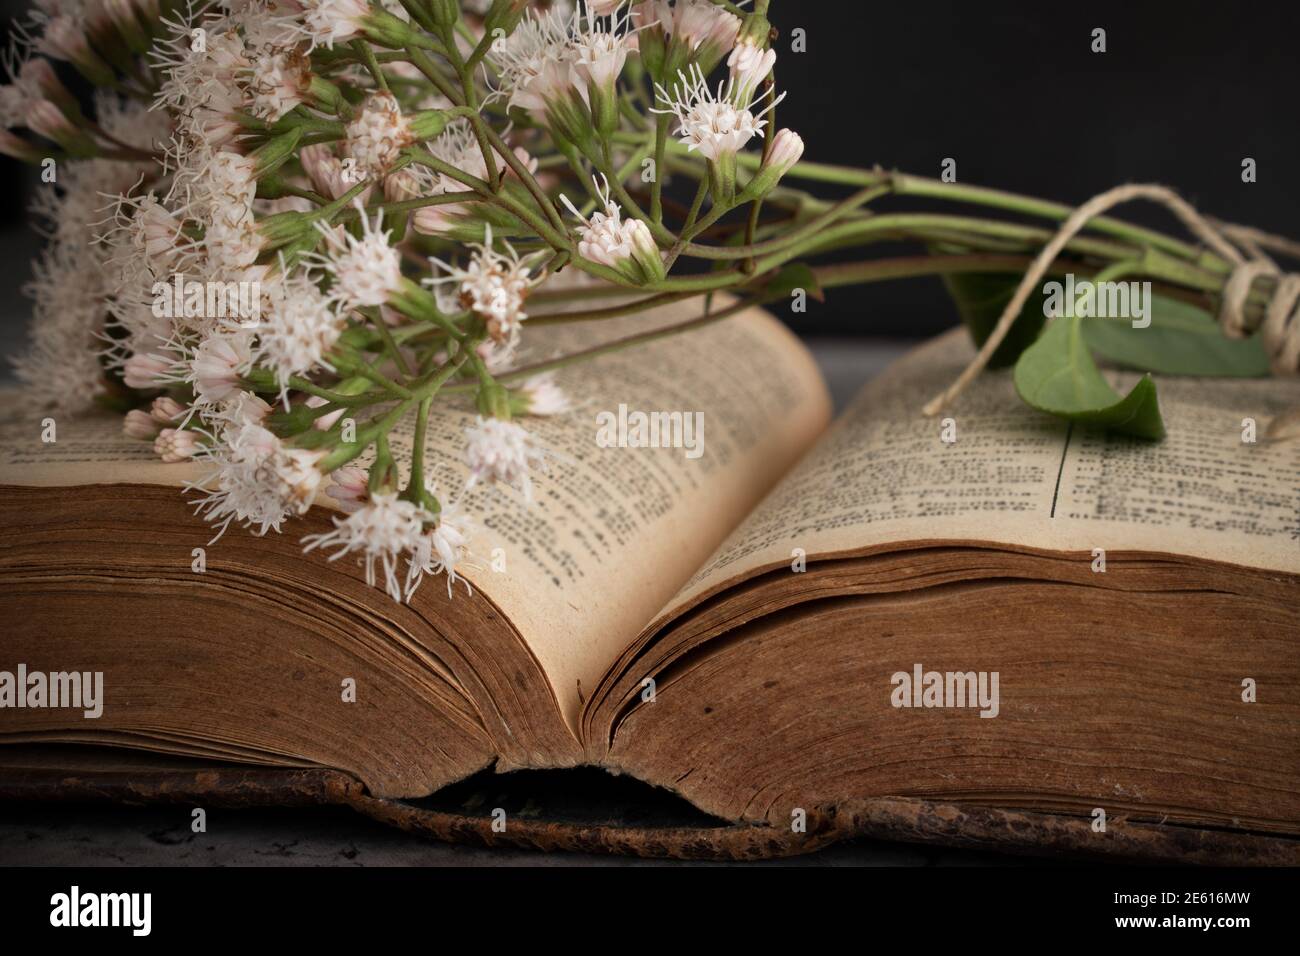 A very old open book with a bouquet of fresh wild flowers tied with a rustic thread and lying on top of written pages. Side angle view of subject Stock Photo